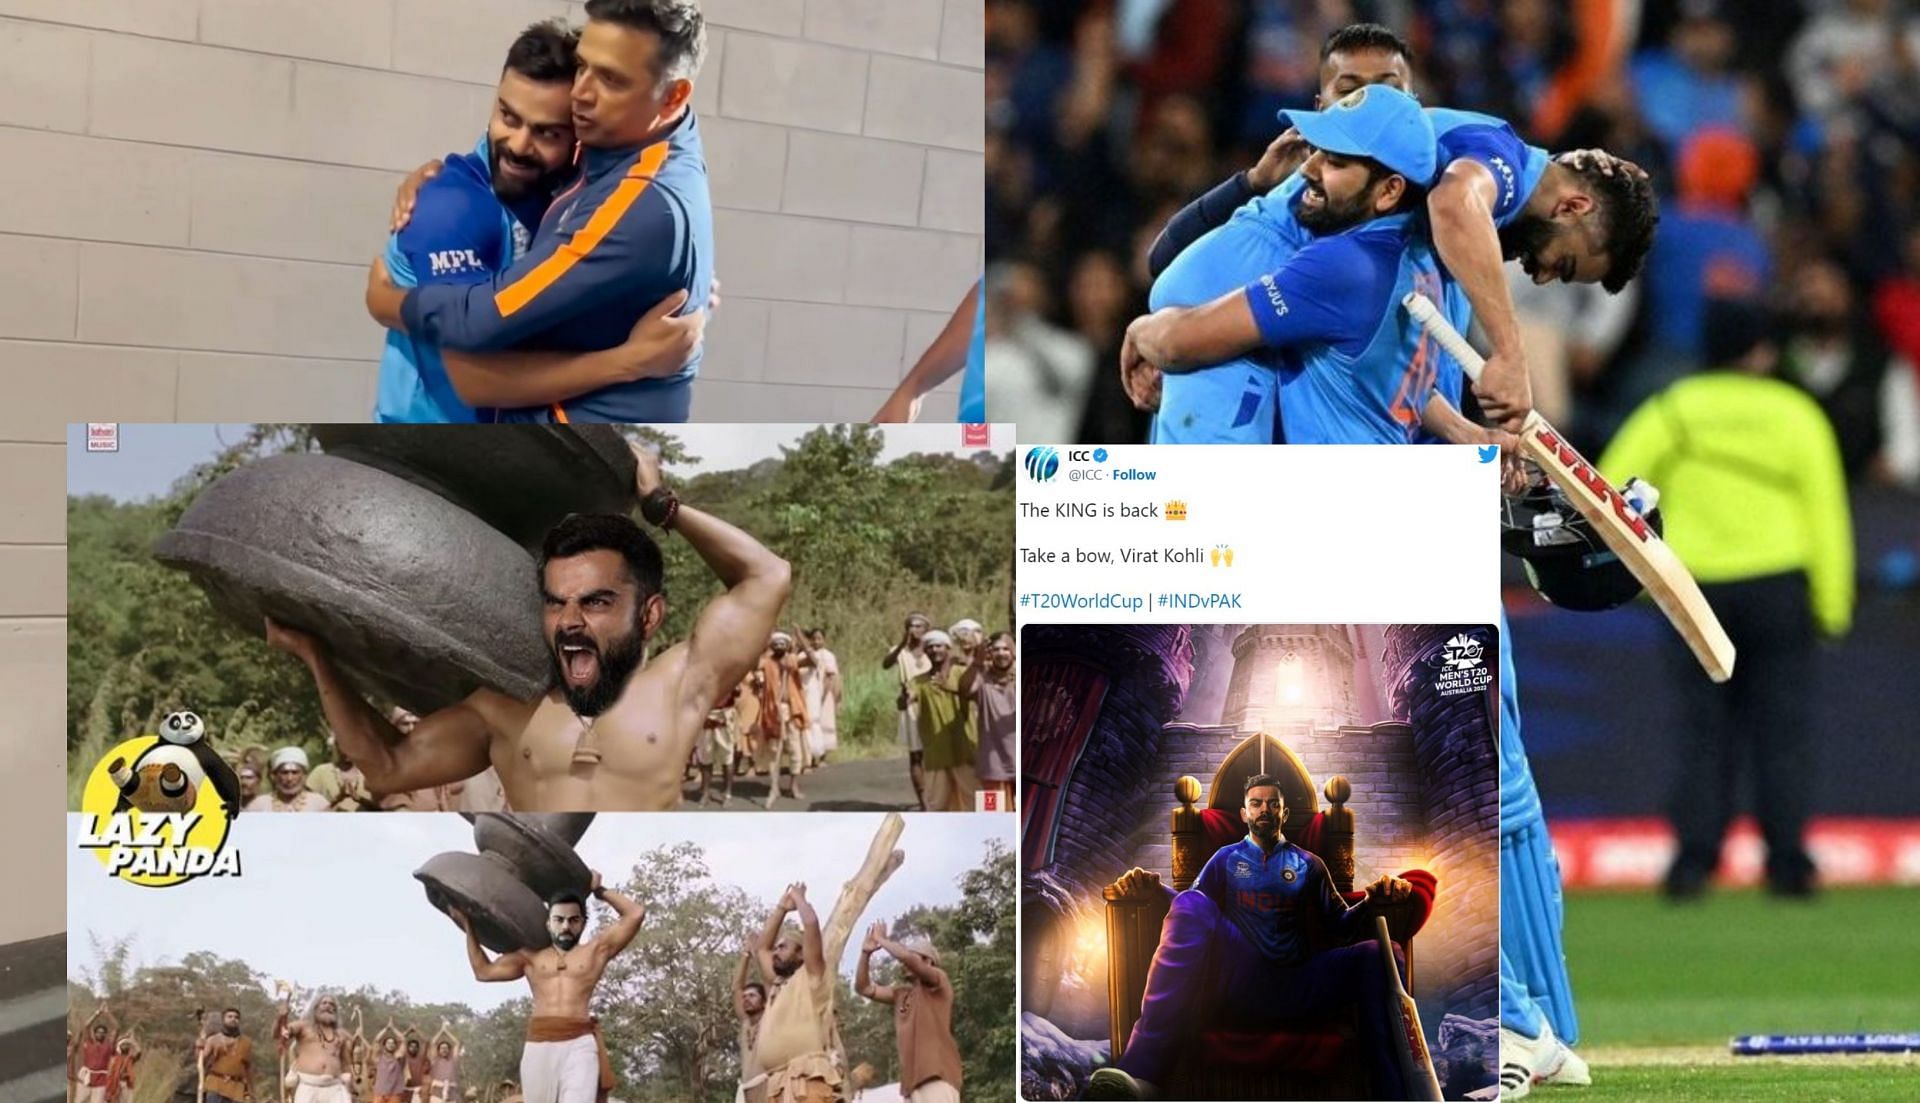 IND vs PAK 2022: Top 10 Virat Kohli memes after his iconic knock helps India edge Pakistan in epic thriller